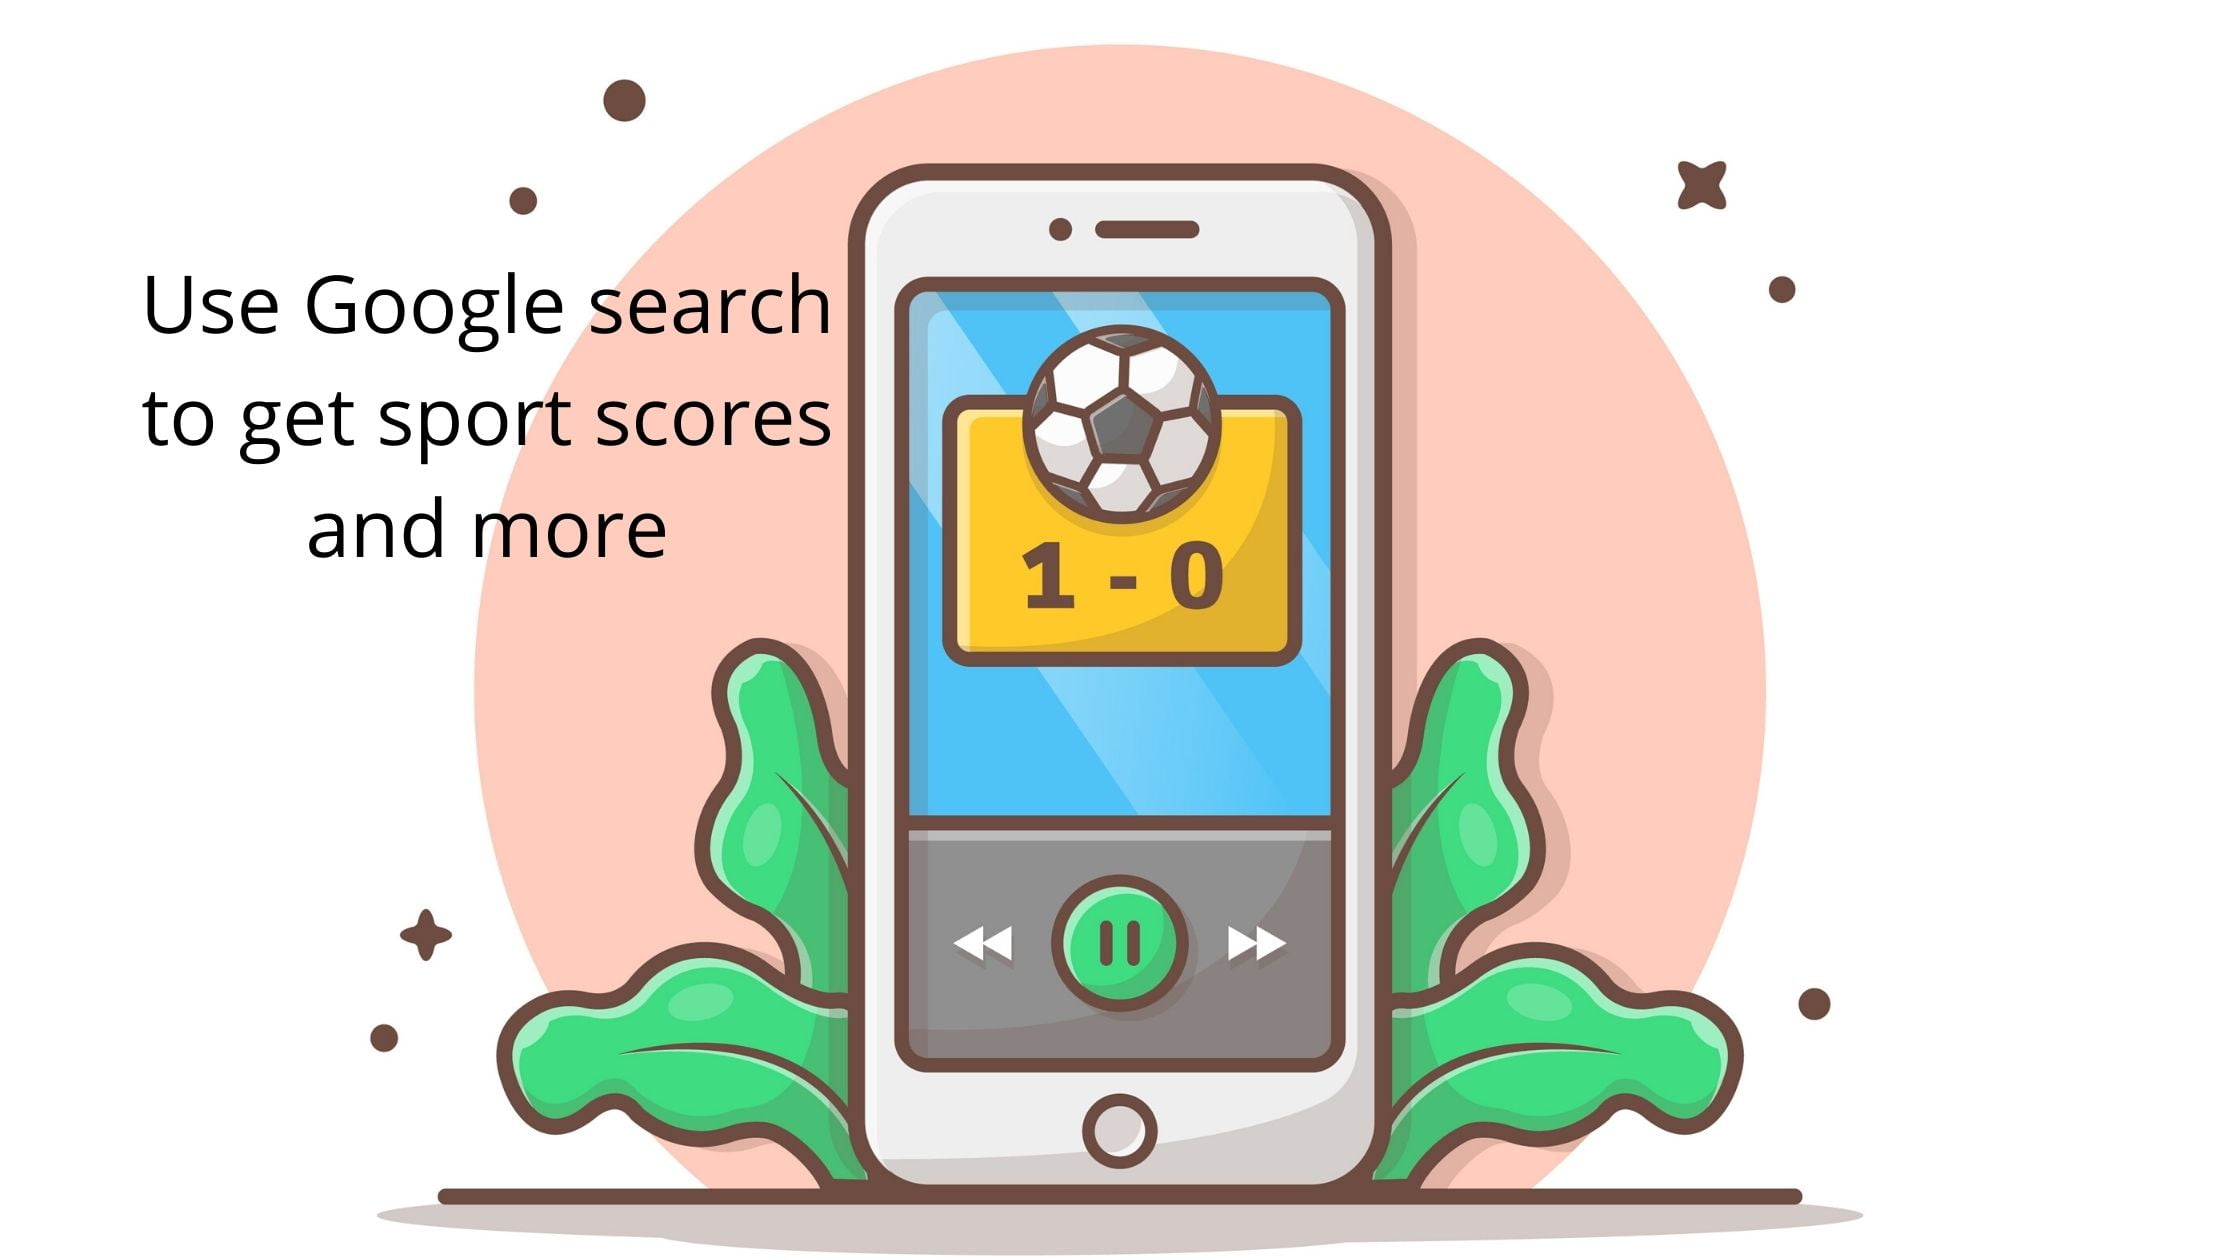 get football scores using Google search